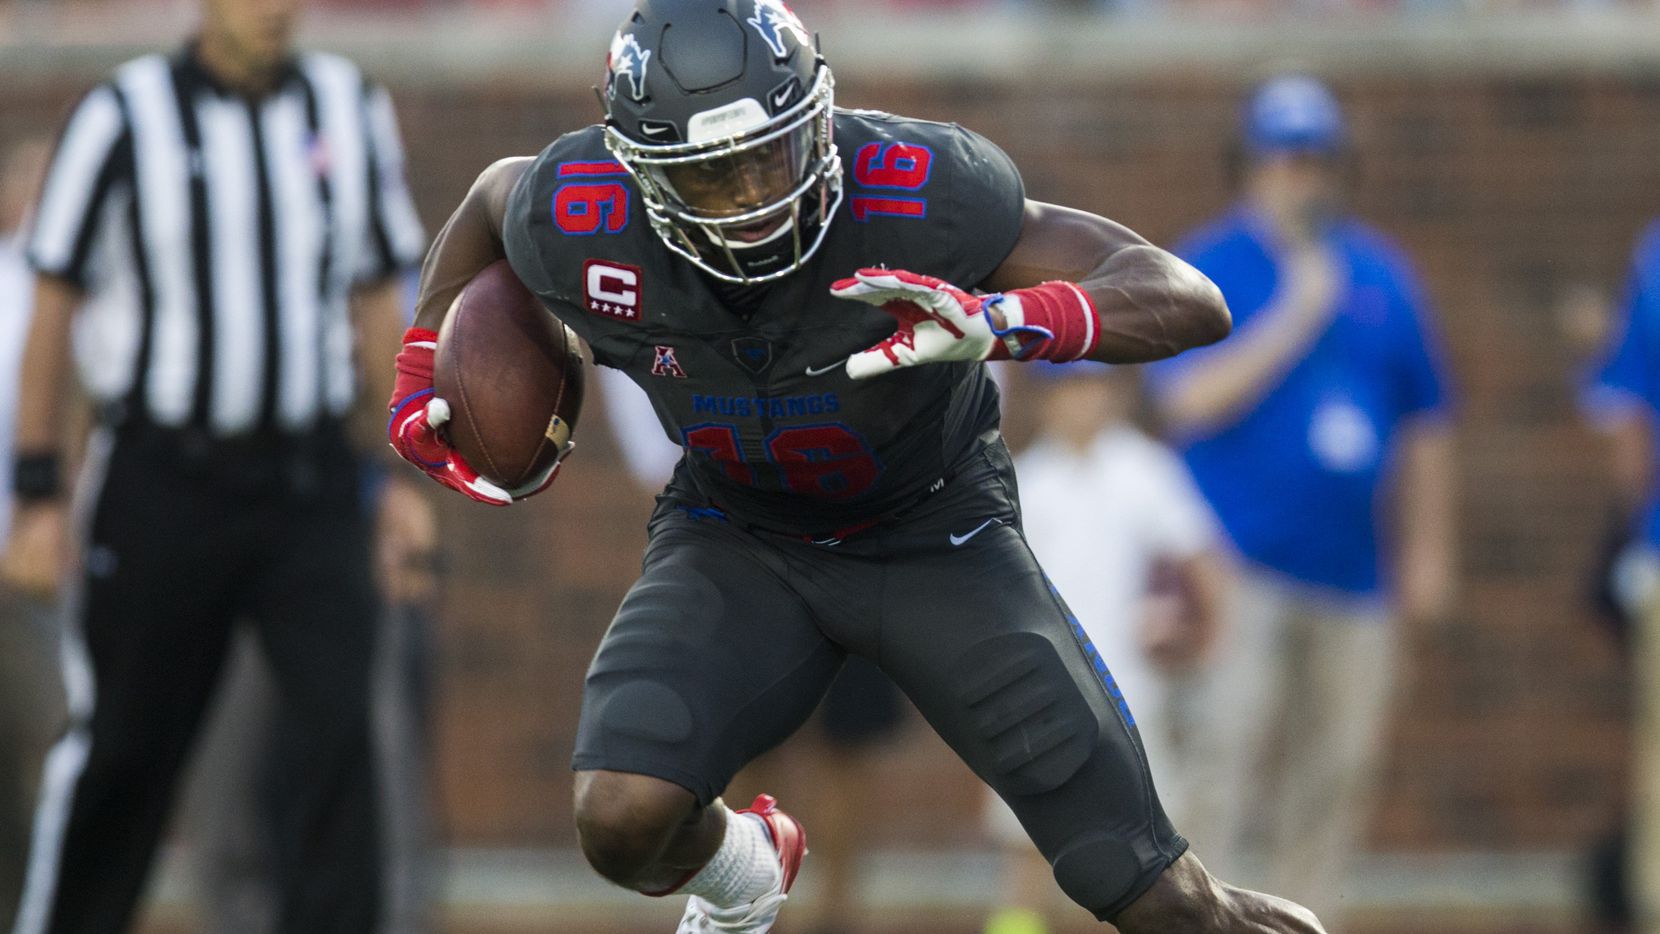 Southern Methodist Mustangs wide receiver Courtland Sutton (16) runs the ball during the second quarter of a game between Arkansas State and SMU on Saturday, September 23, 2017 at Ford Stadium on the SMU campus in Dallas. (Ashley Landis/The Dallas Morning News) 
